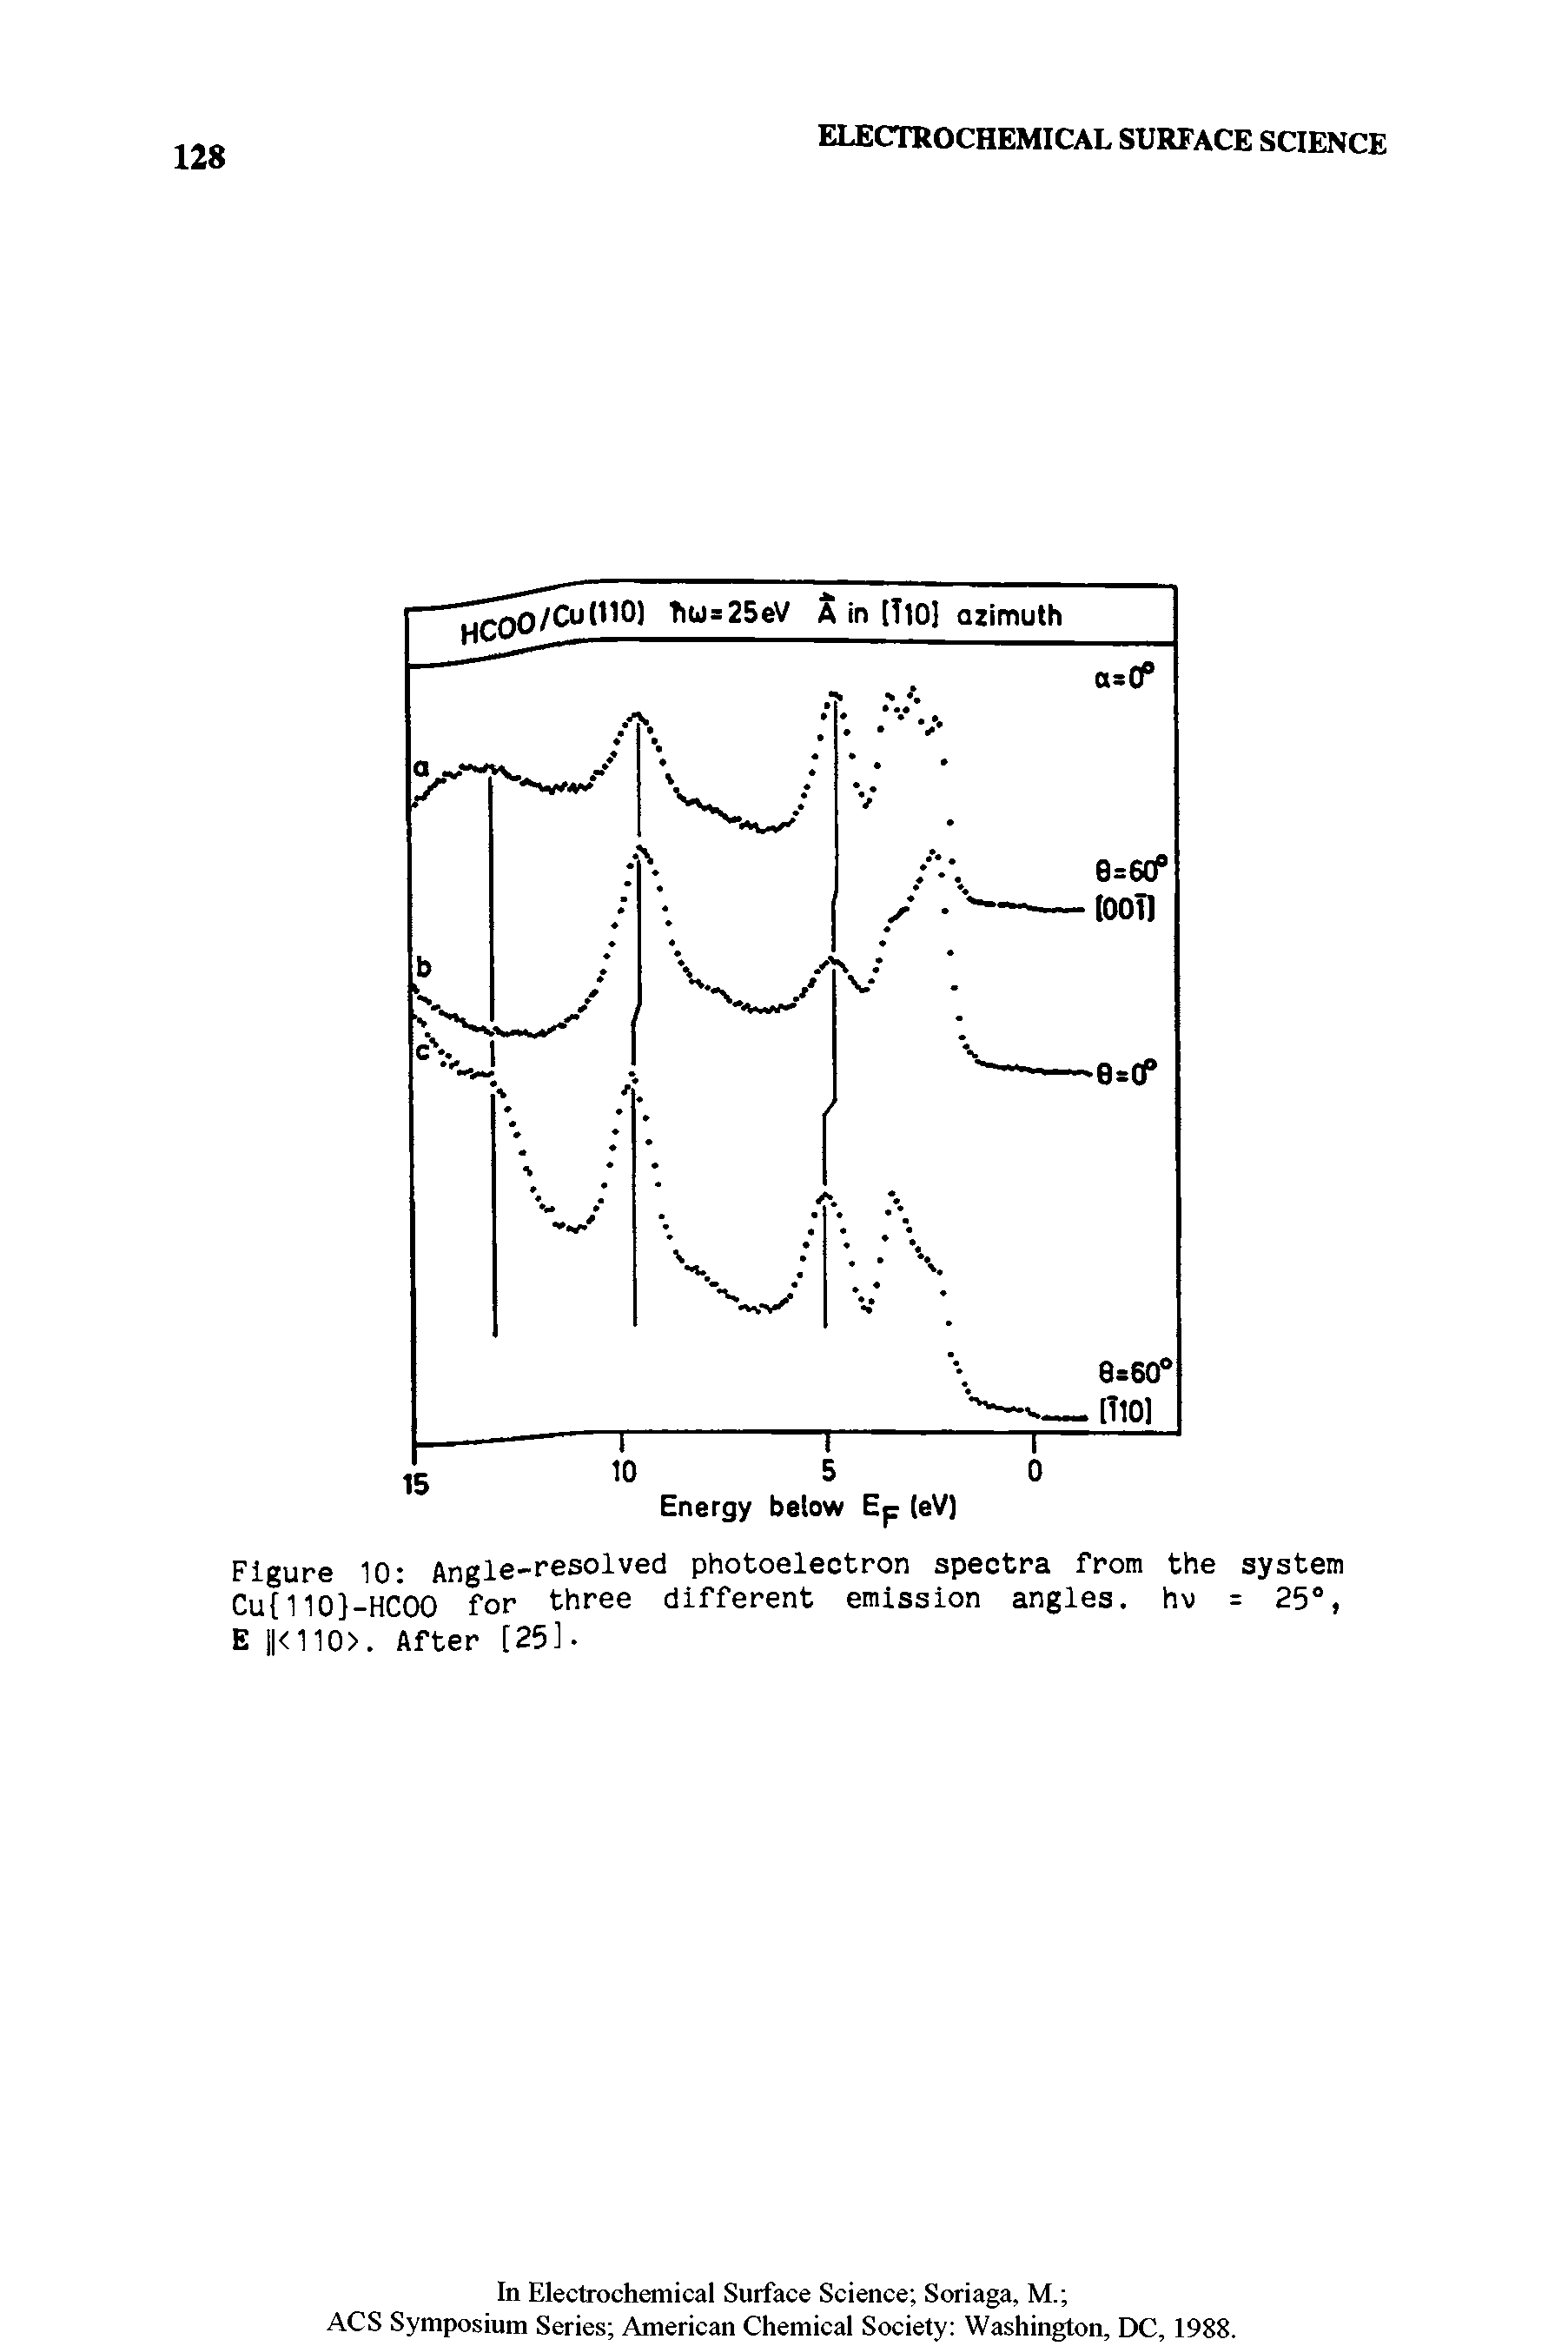 Figure 10 Angle-resolved photoelectron spectra from the system Cu 11D -HC00 for three different emission angles, hv = 25°, E j <110>. After [251.